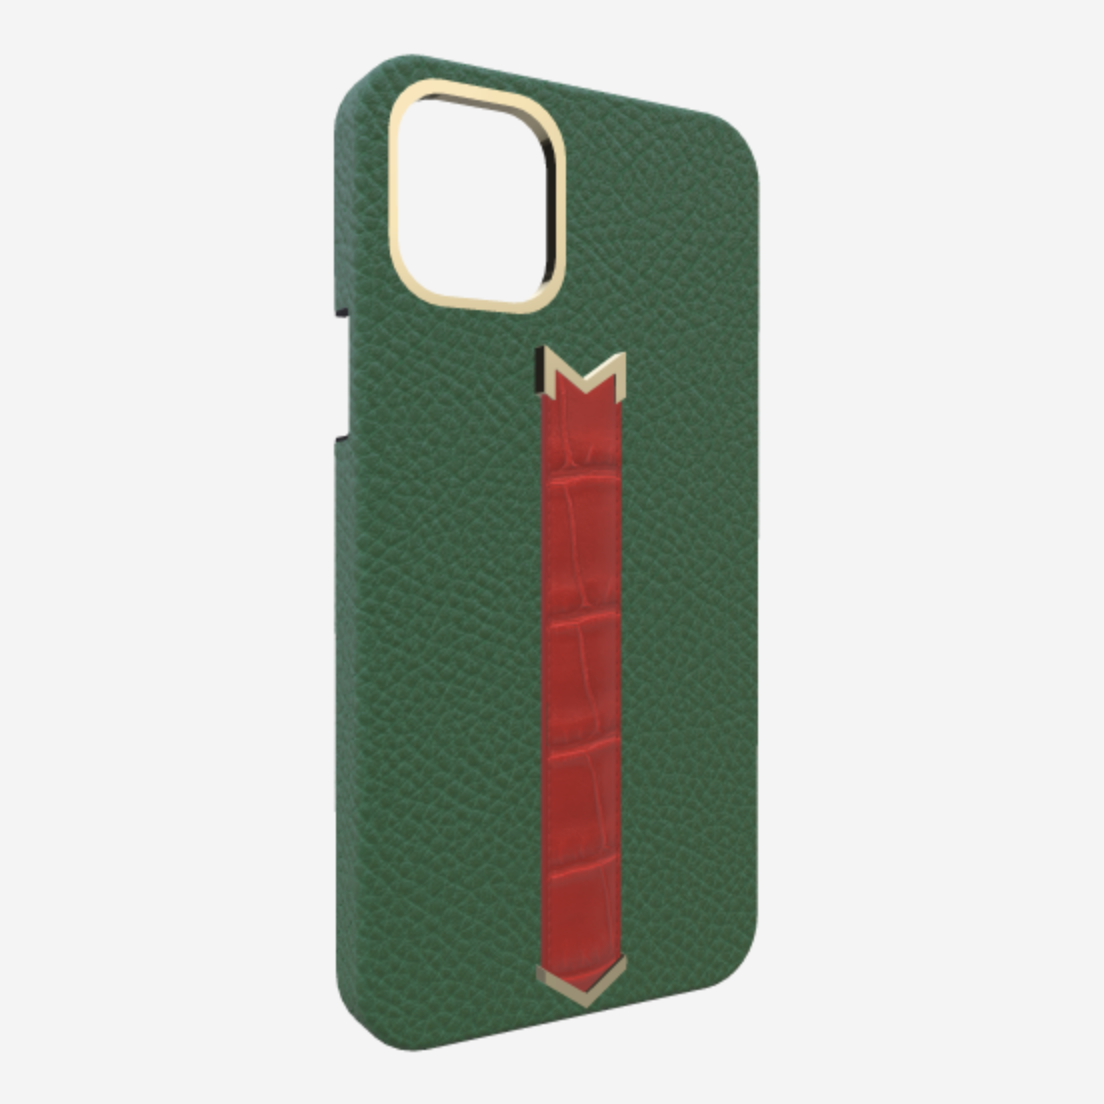 Gold Finger Strap Case for iPhone 13 Pro Max in Genuine Calfskin and Alligator Emerald Green Glamour Red 